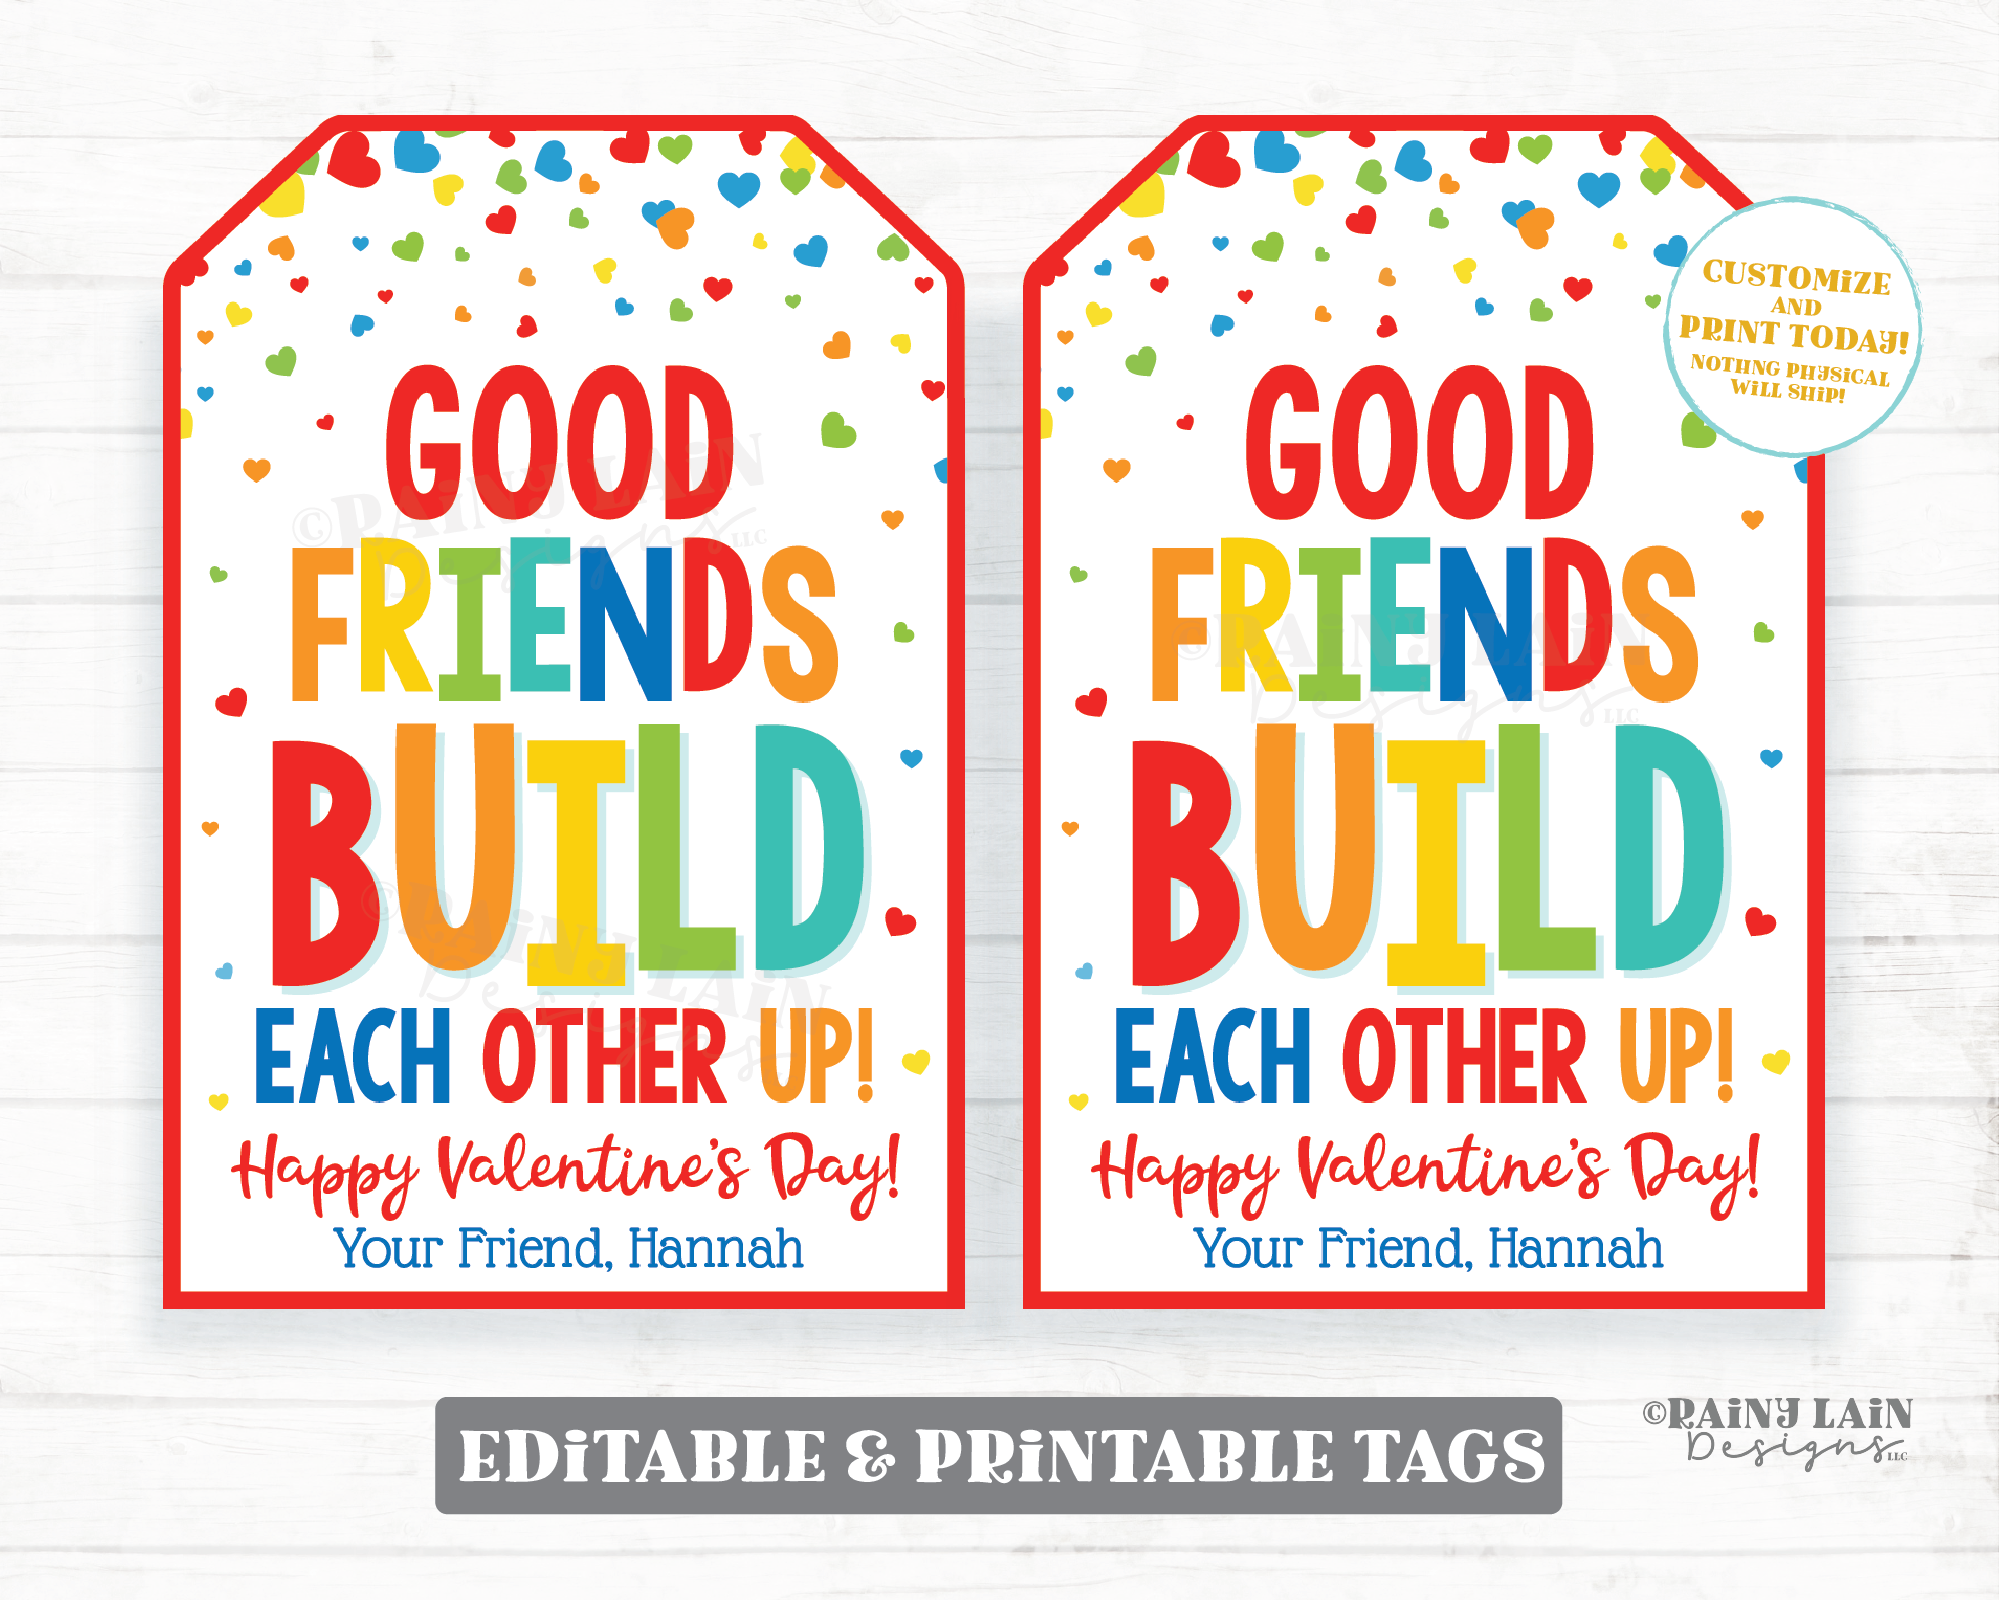 Good Friends Build Each Other Up Valentine Tag Building Blocks Puzzle Printable Preschool Friendship Valentines Non-Candy Classroom Editable